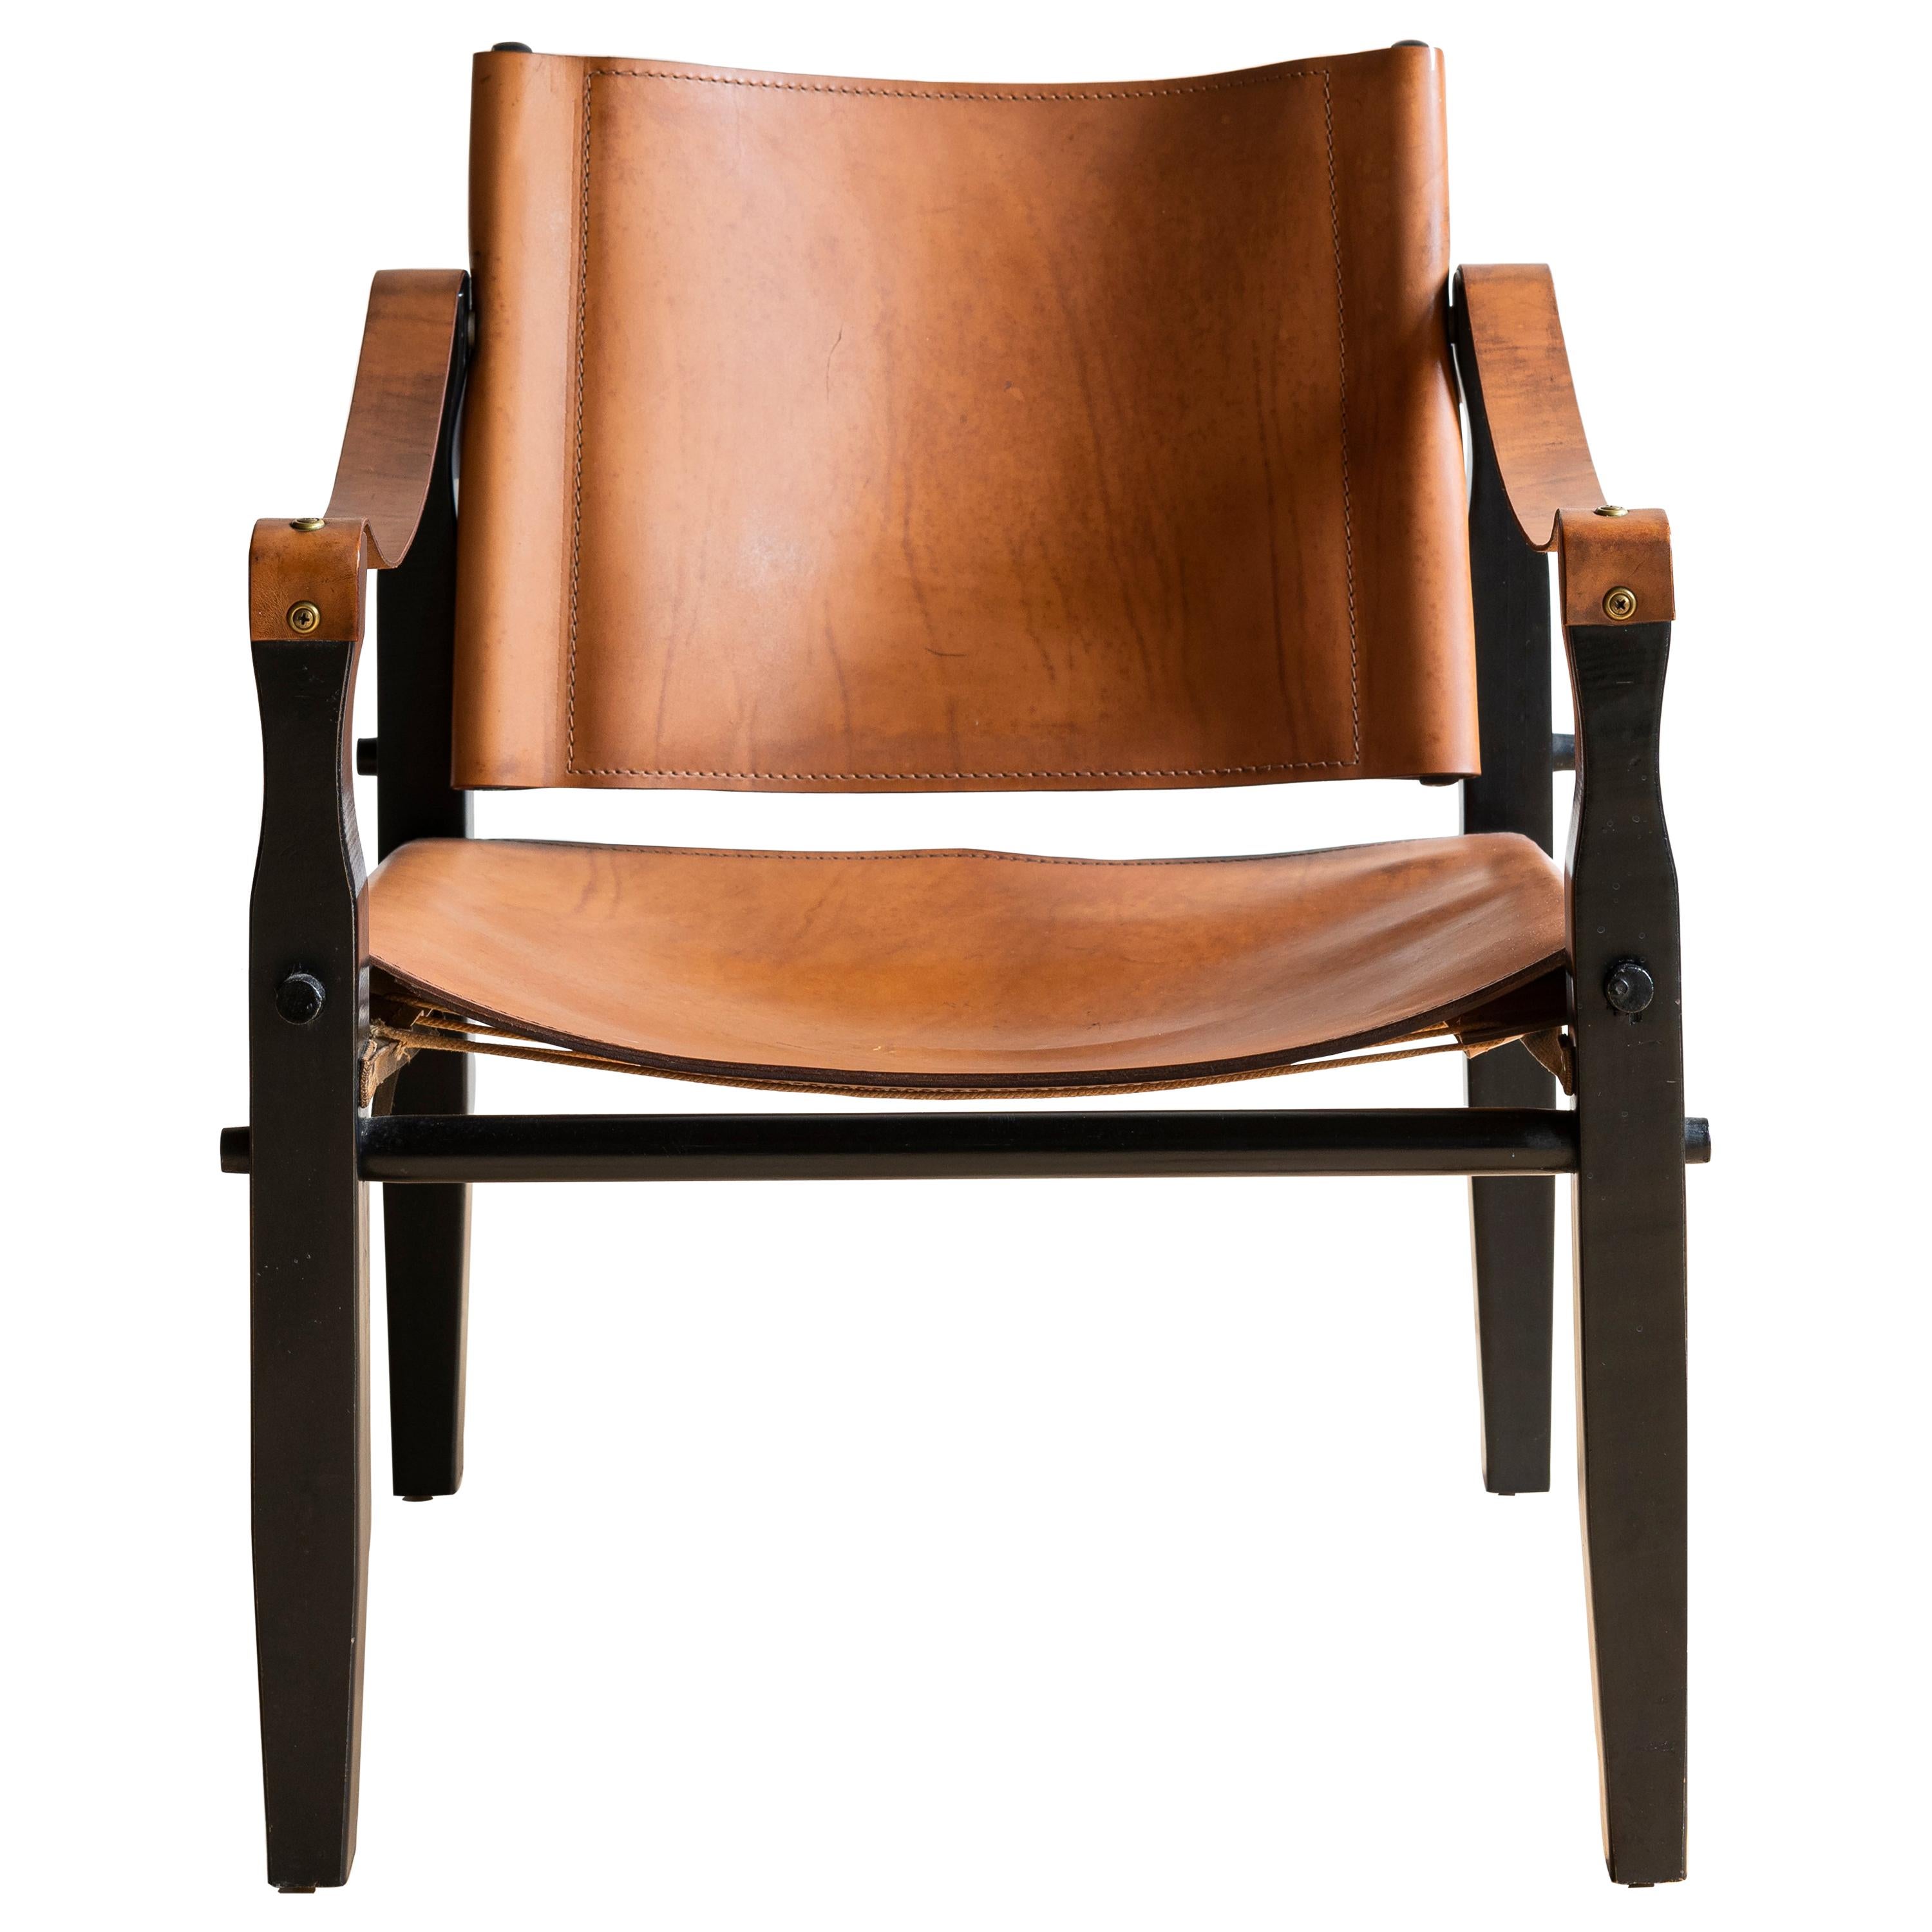 Brown Leather Safari Chair by Folding Furniture Co.